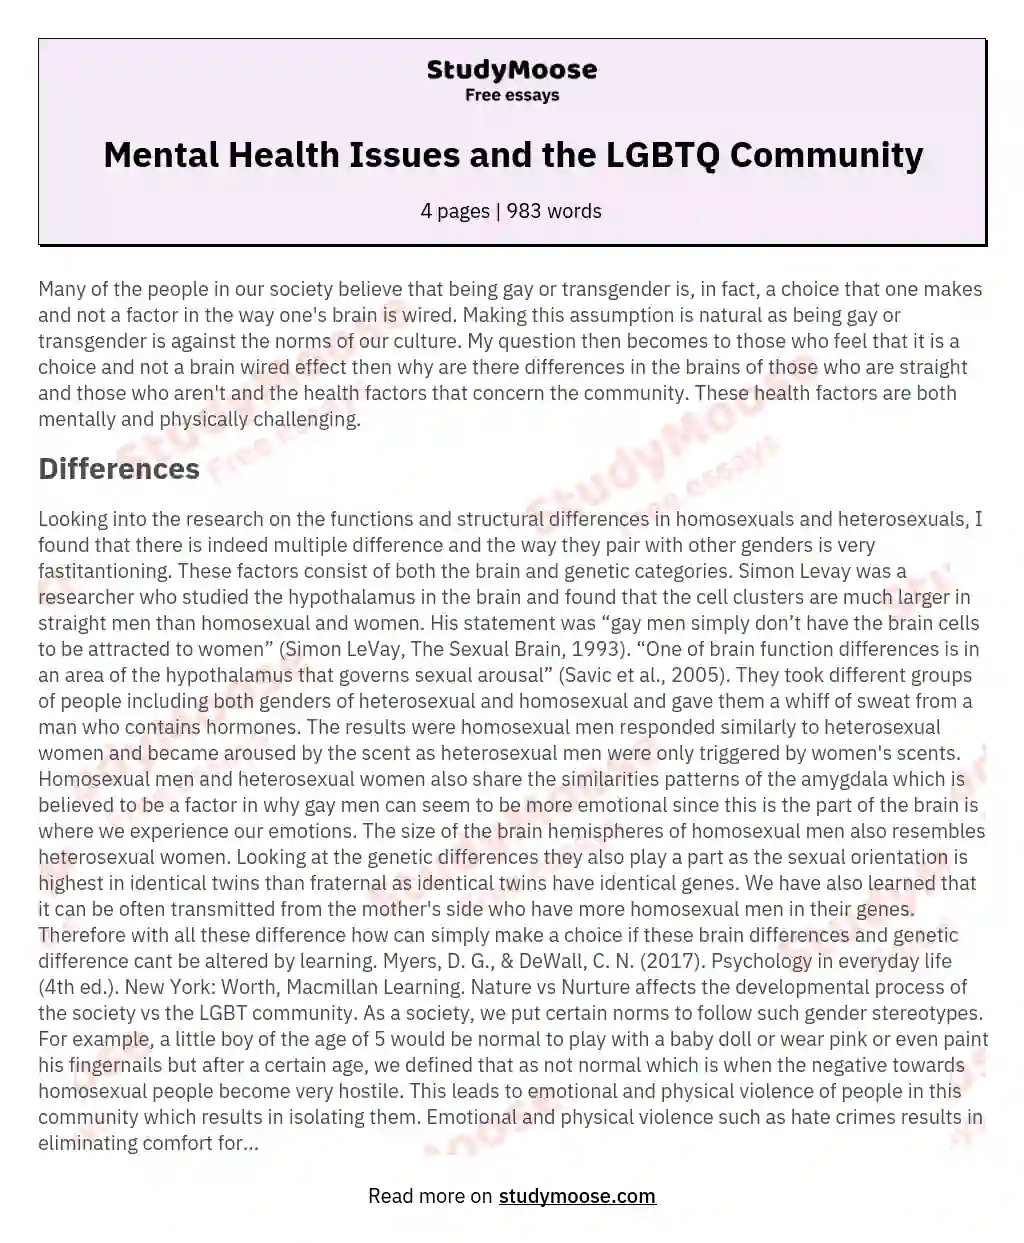 Mental Health Issues and the LGBTQ Community essay